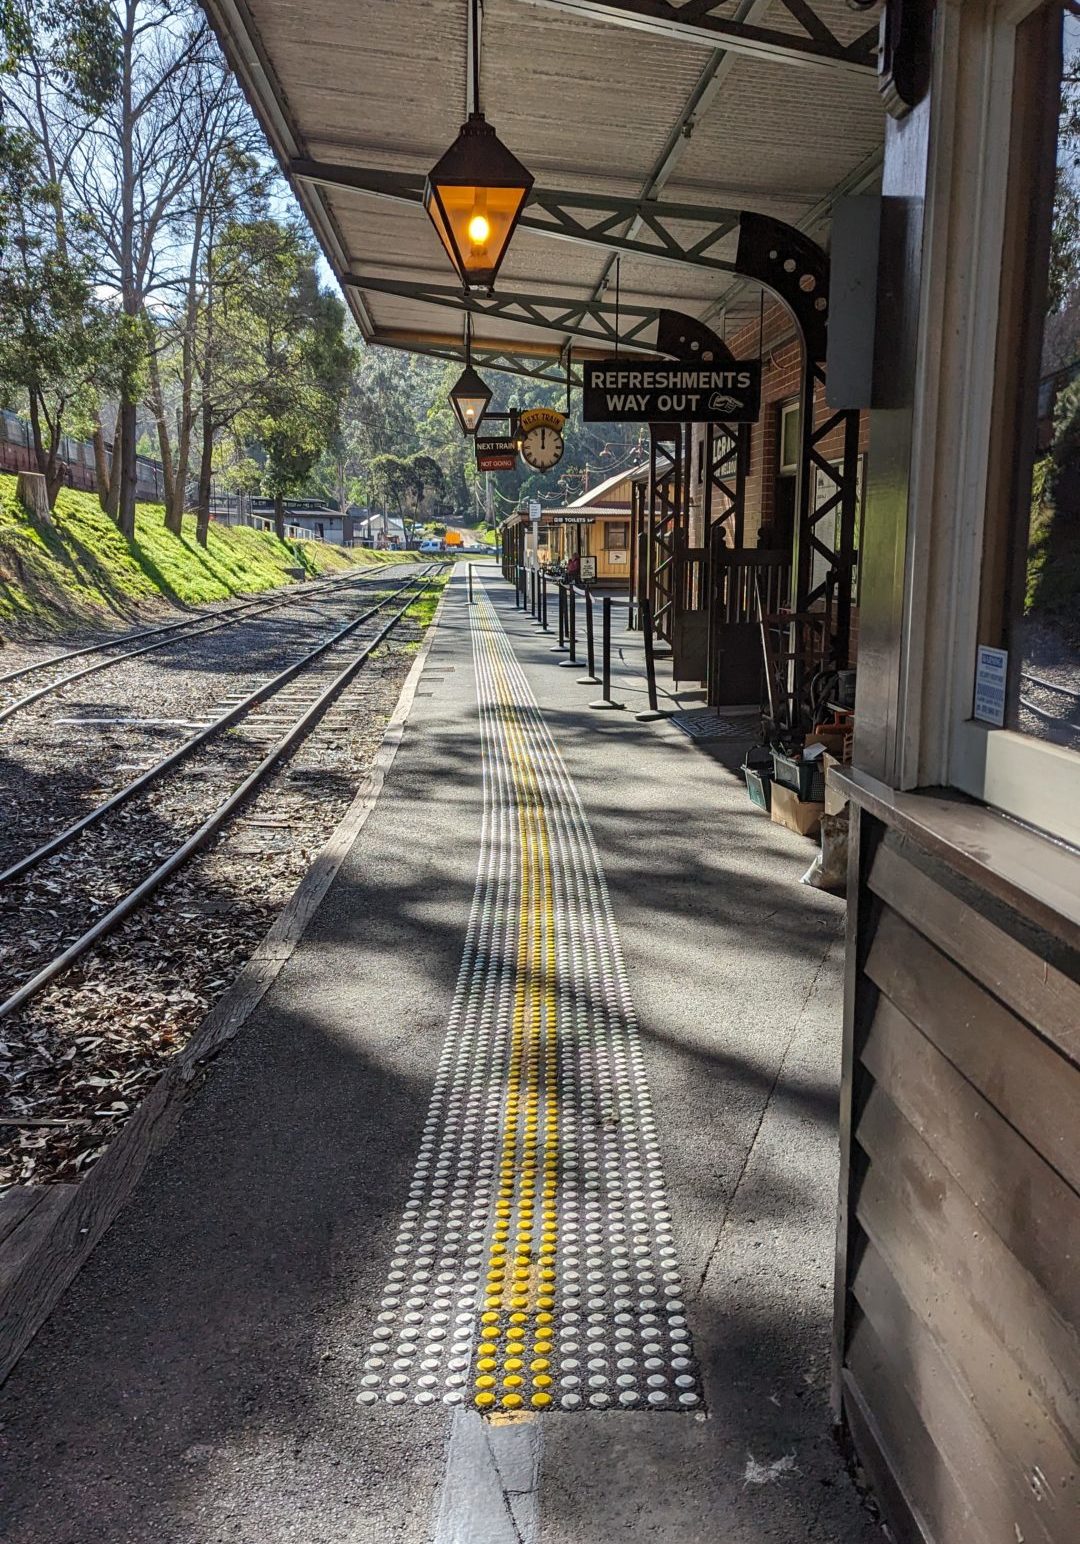 Tactile Ground Surface Indicators At Puffing Billy's Belgrave Station Platform